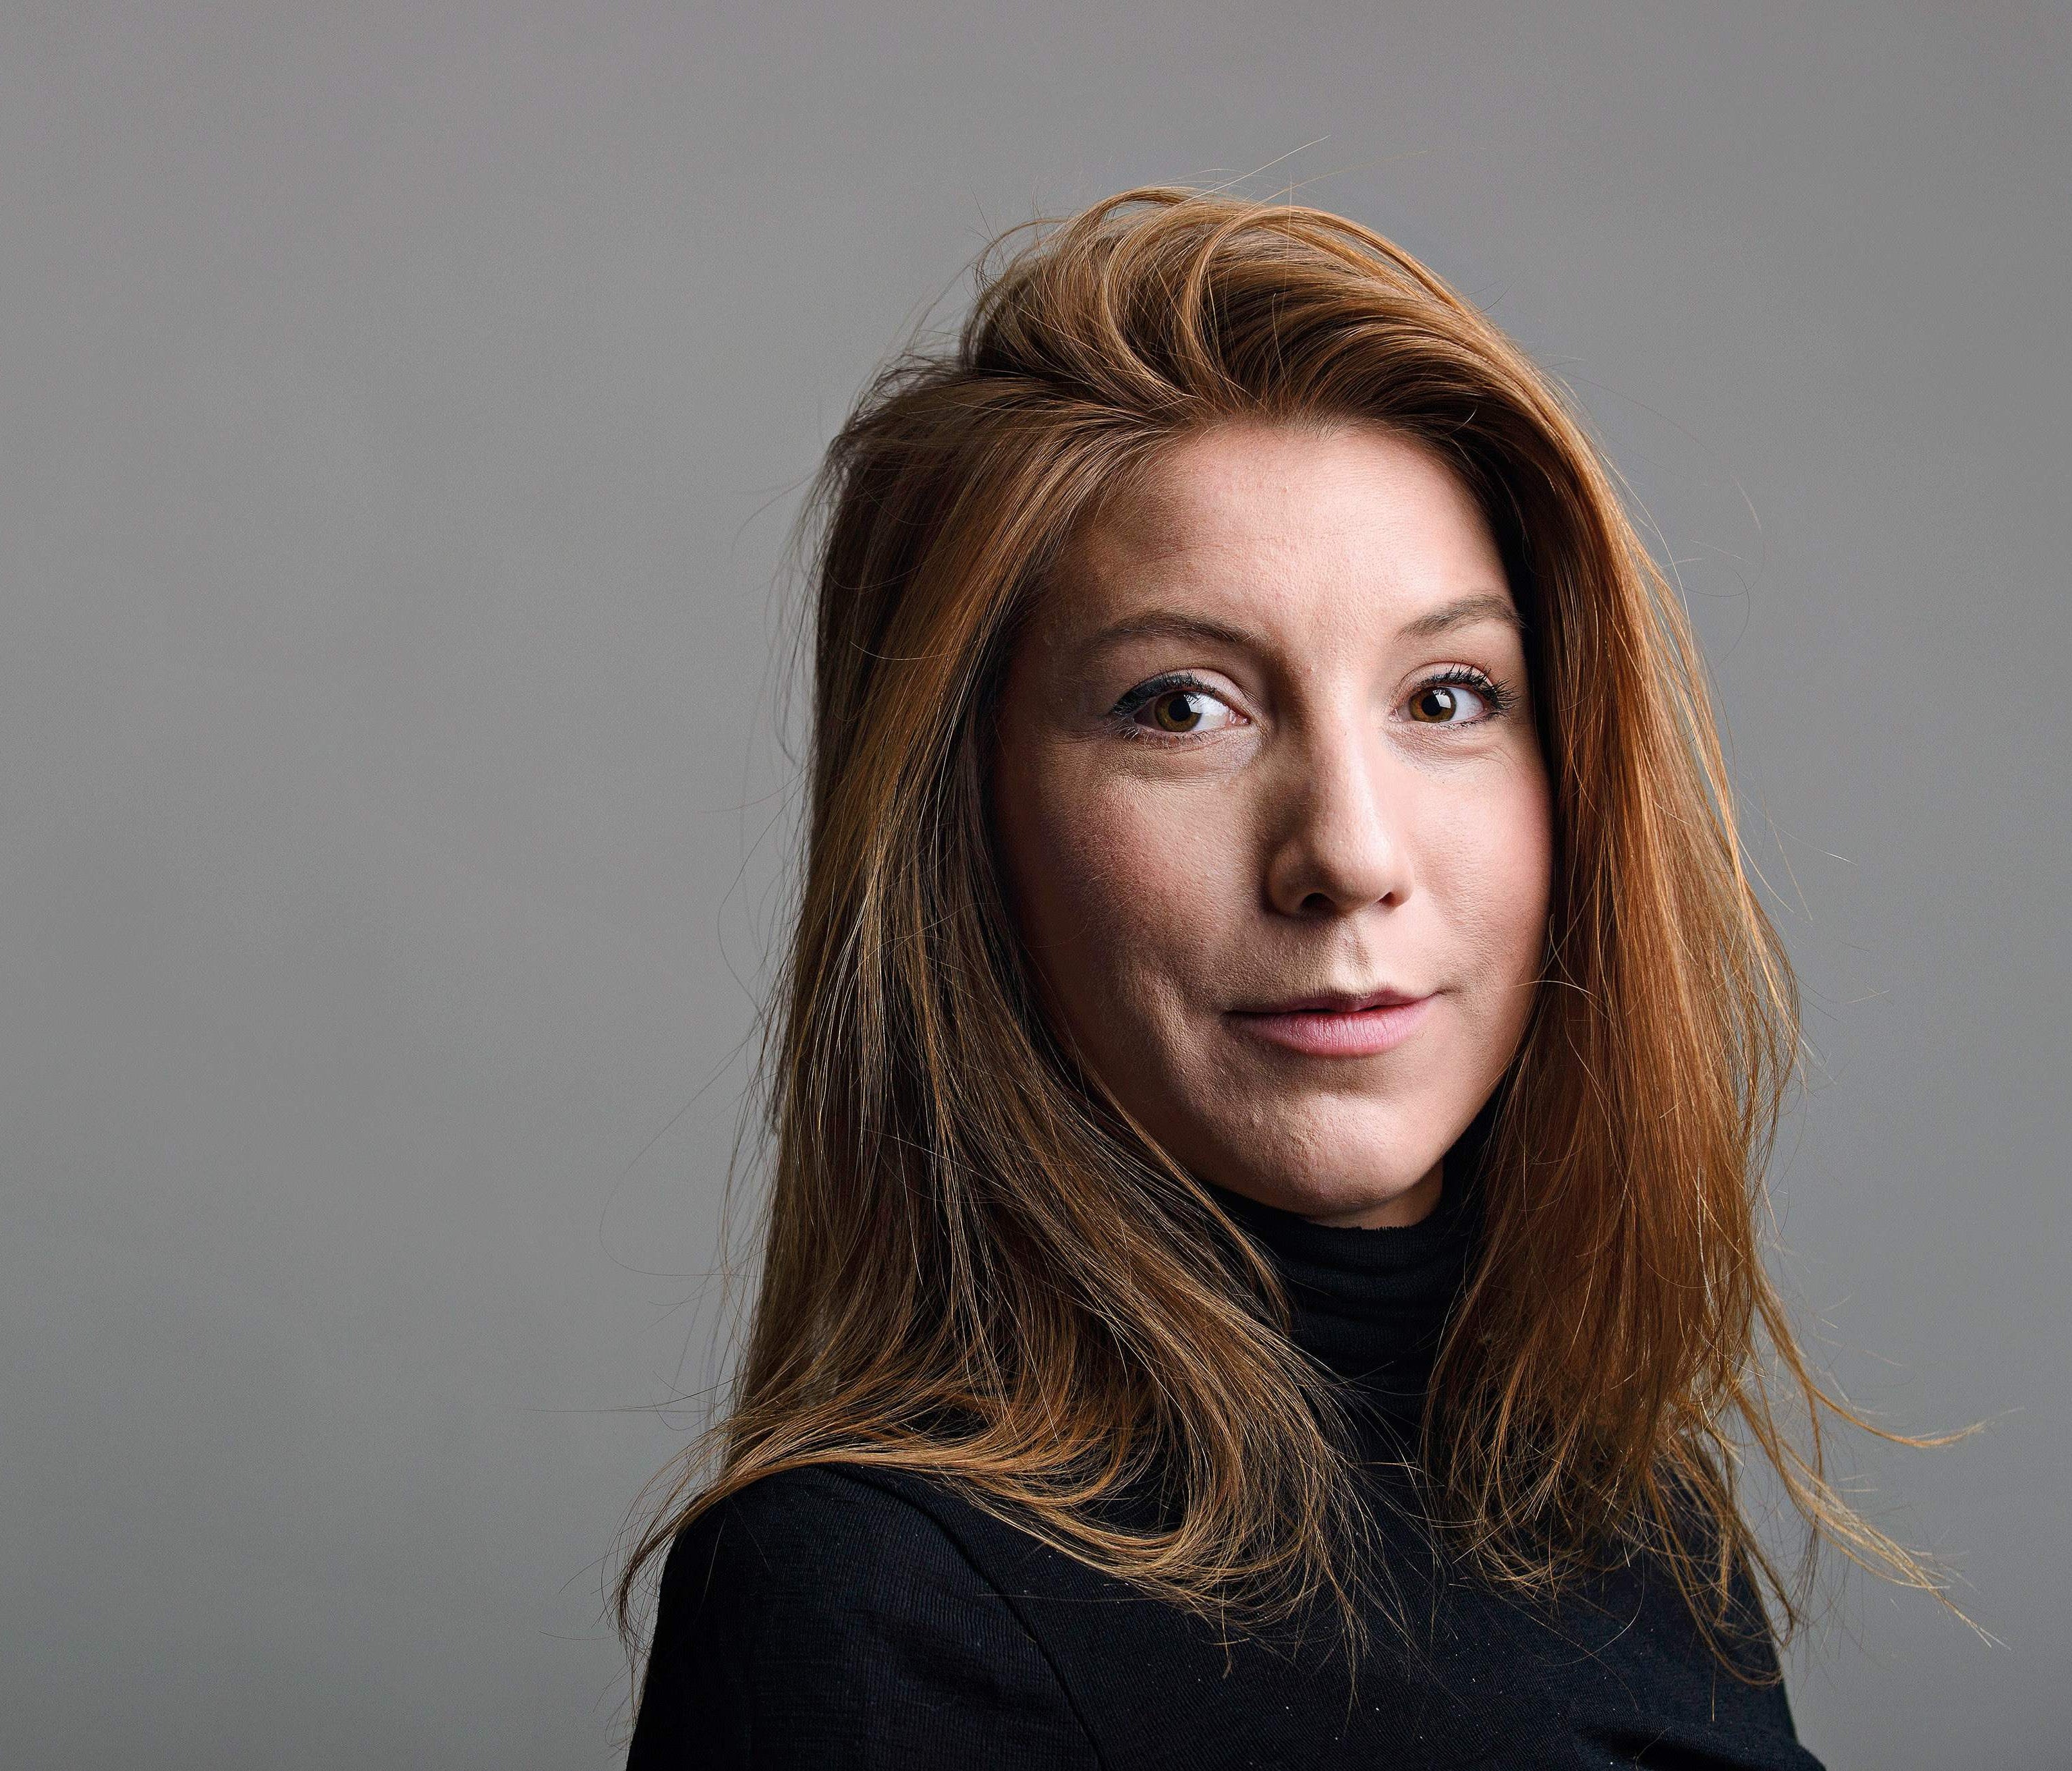 This family handout photo released on Aug. 12, 2017 shows Swedish journalist Kim Wall who was allegedly on board a submarine south of Copenhagen before it sank on August 11, 2017.